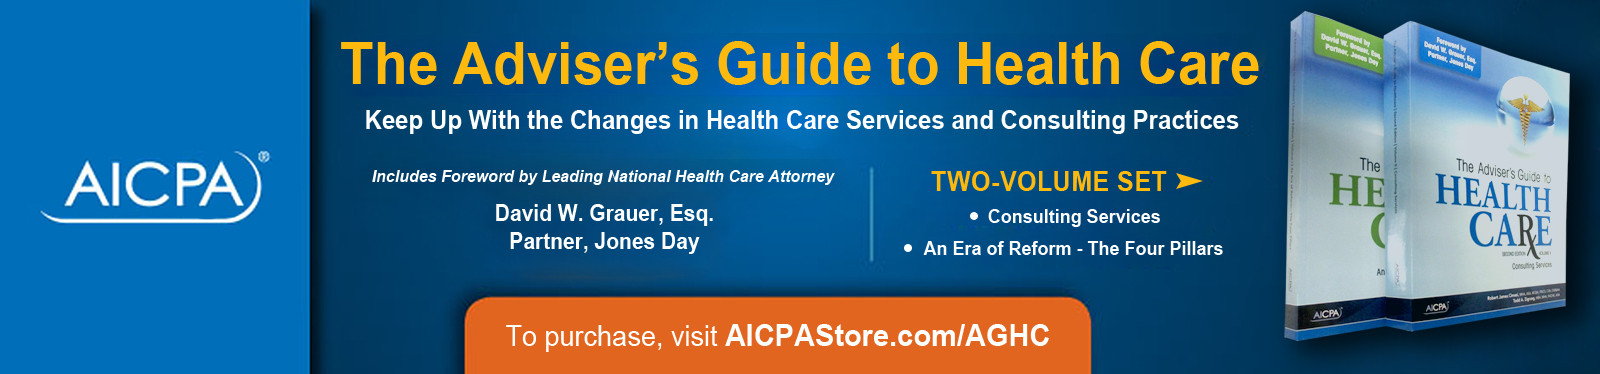 5 Advisers Guide To Health Care Banner 1600 374